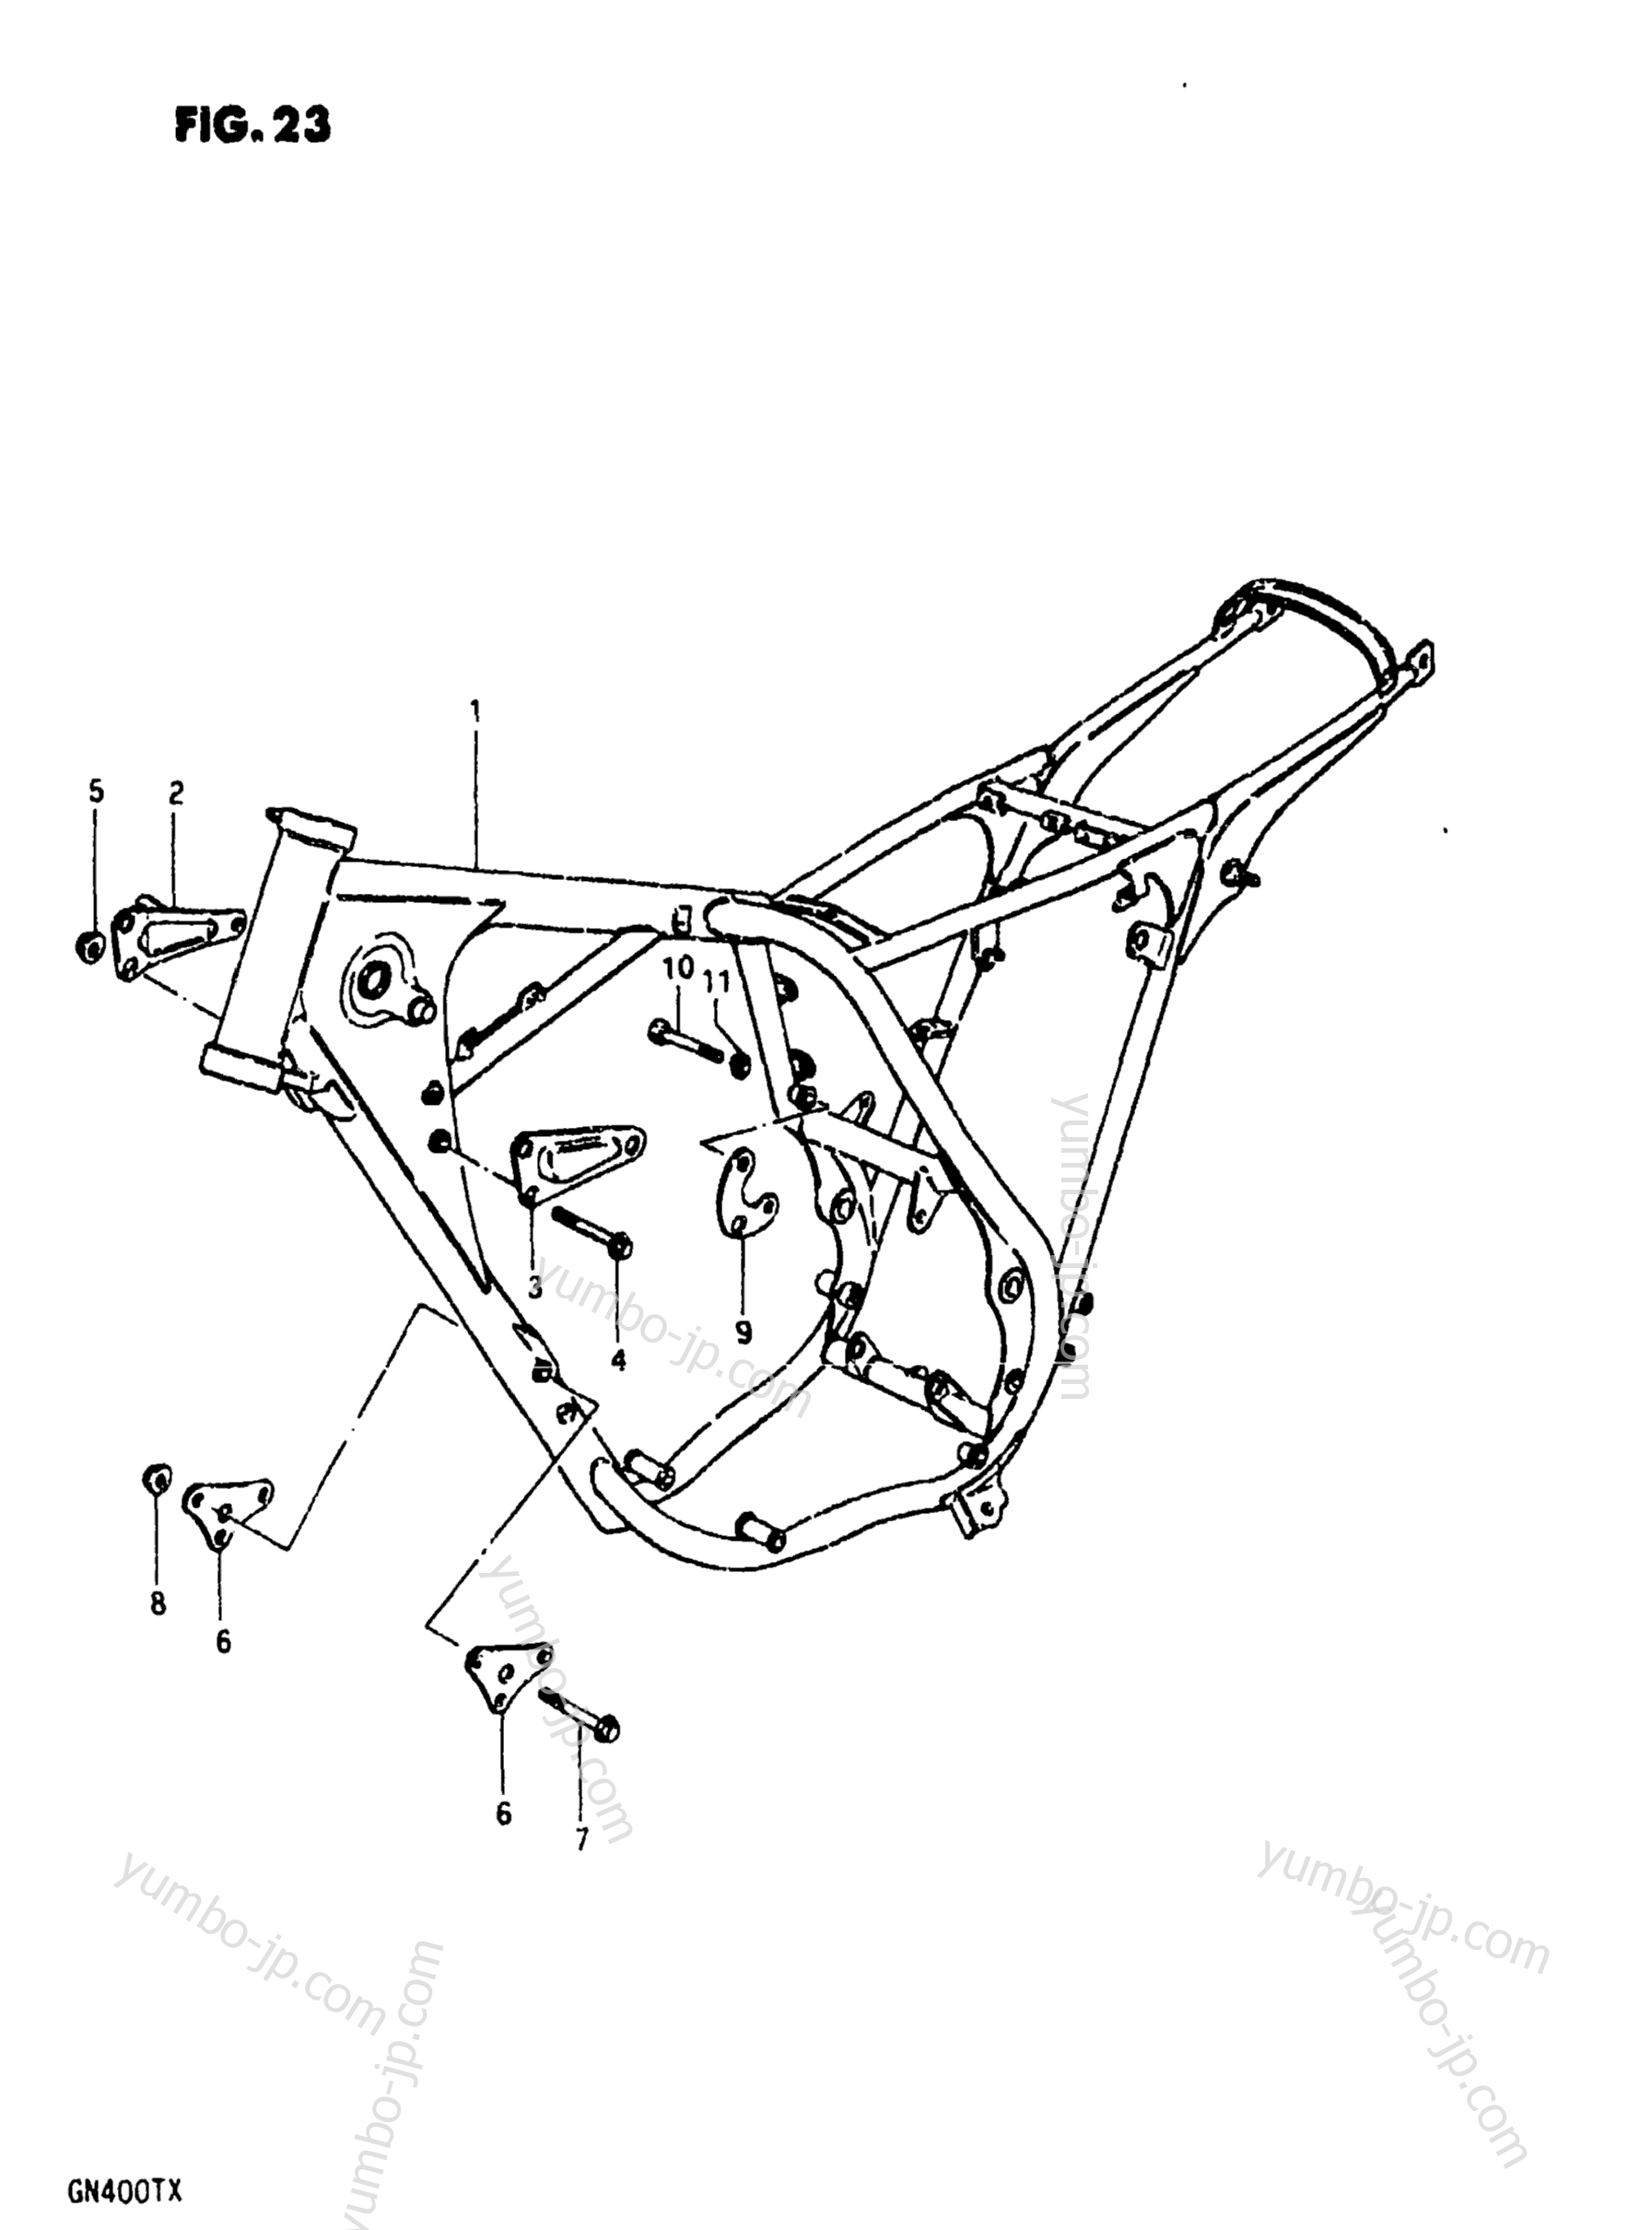 FRAME for motorcycles SUZUKI GN400T 1981 year